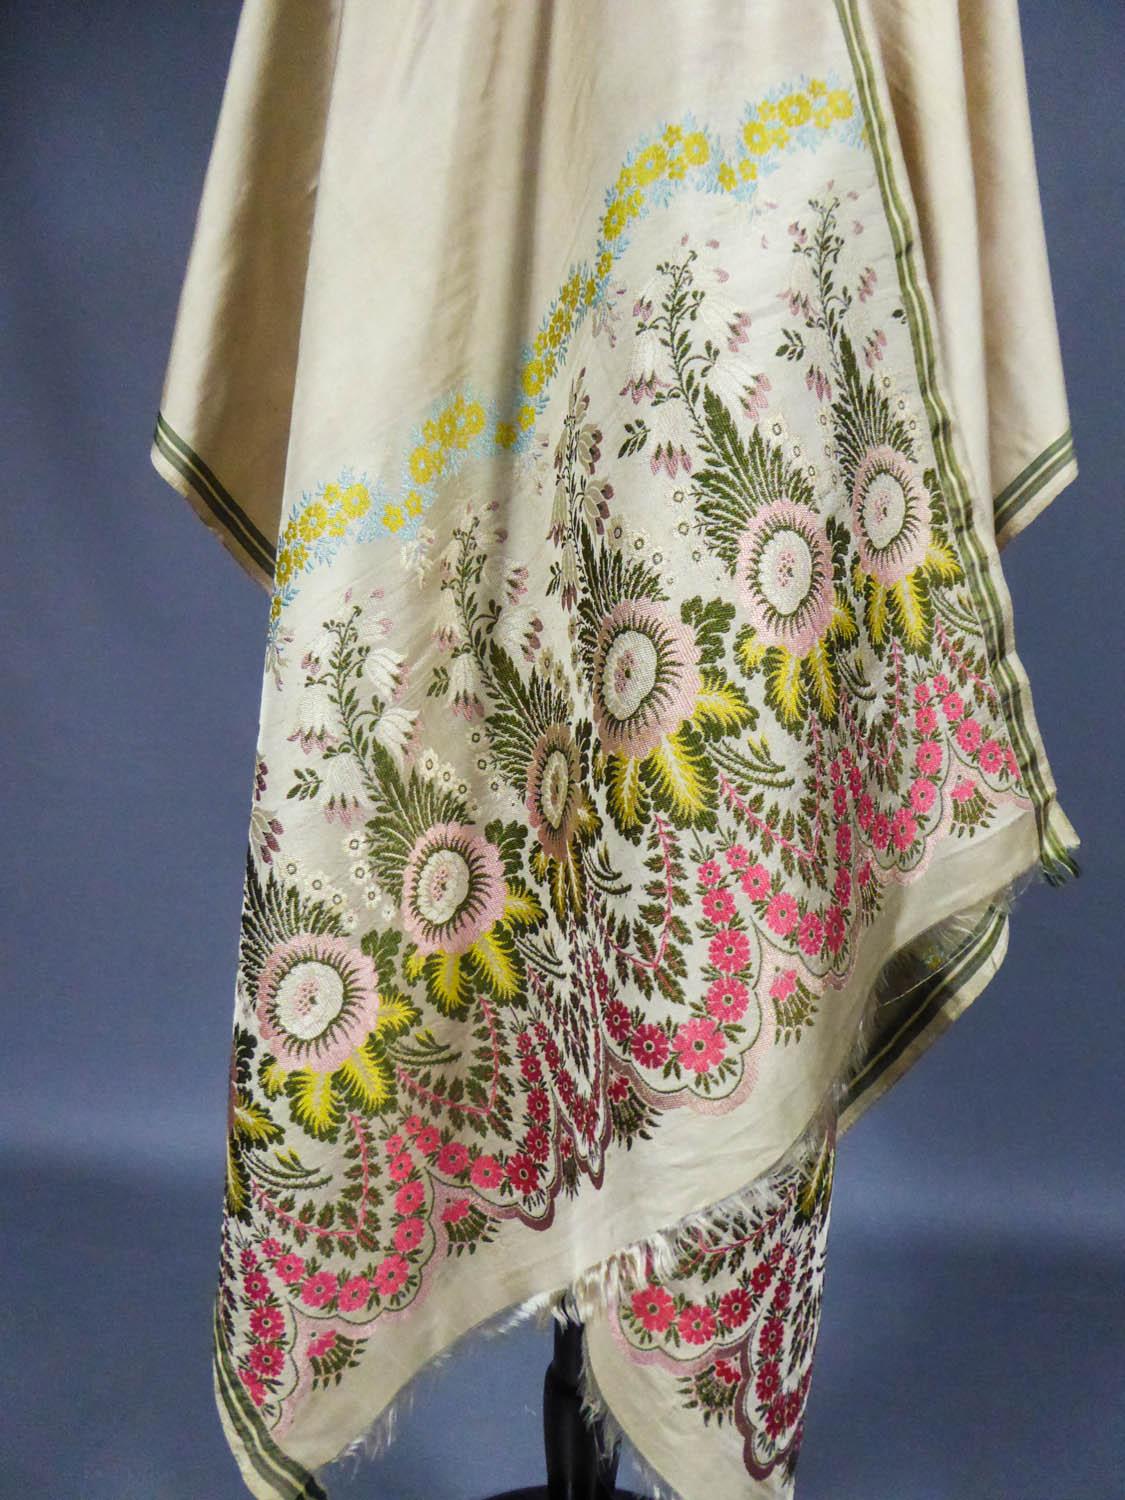 Circa 1820-1840
England

Elegant fashion scarf in brocaded silk - England, manufactory of Spitalfield around 1820. Seven boteh in bouquets of naturalistic flowers constitute each end of this scarf with ivory silk serge background. On the sides